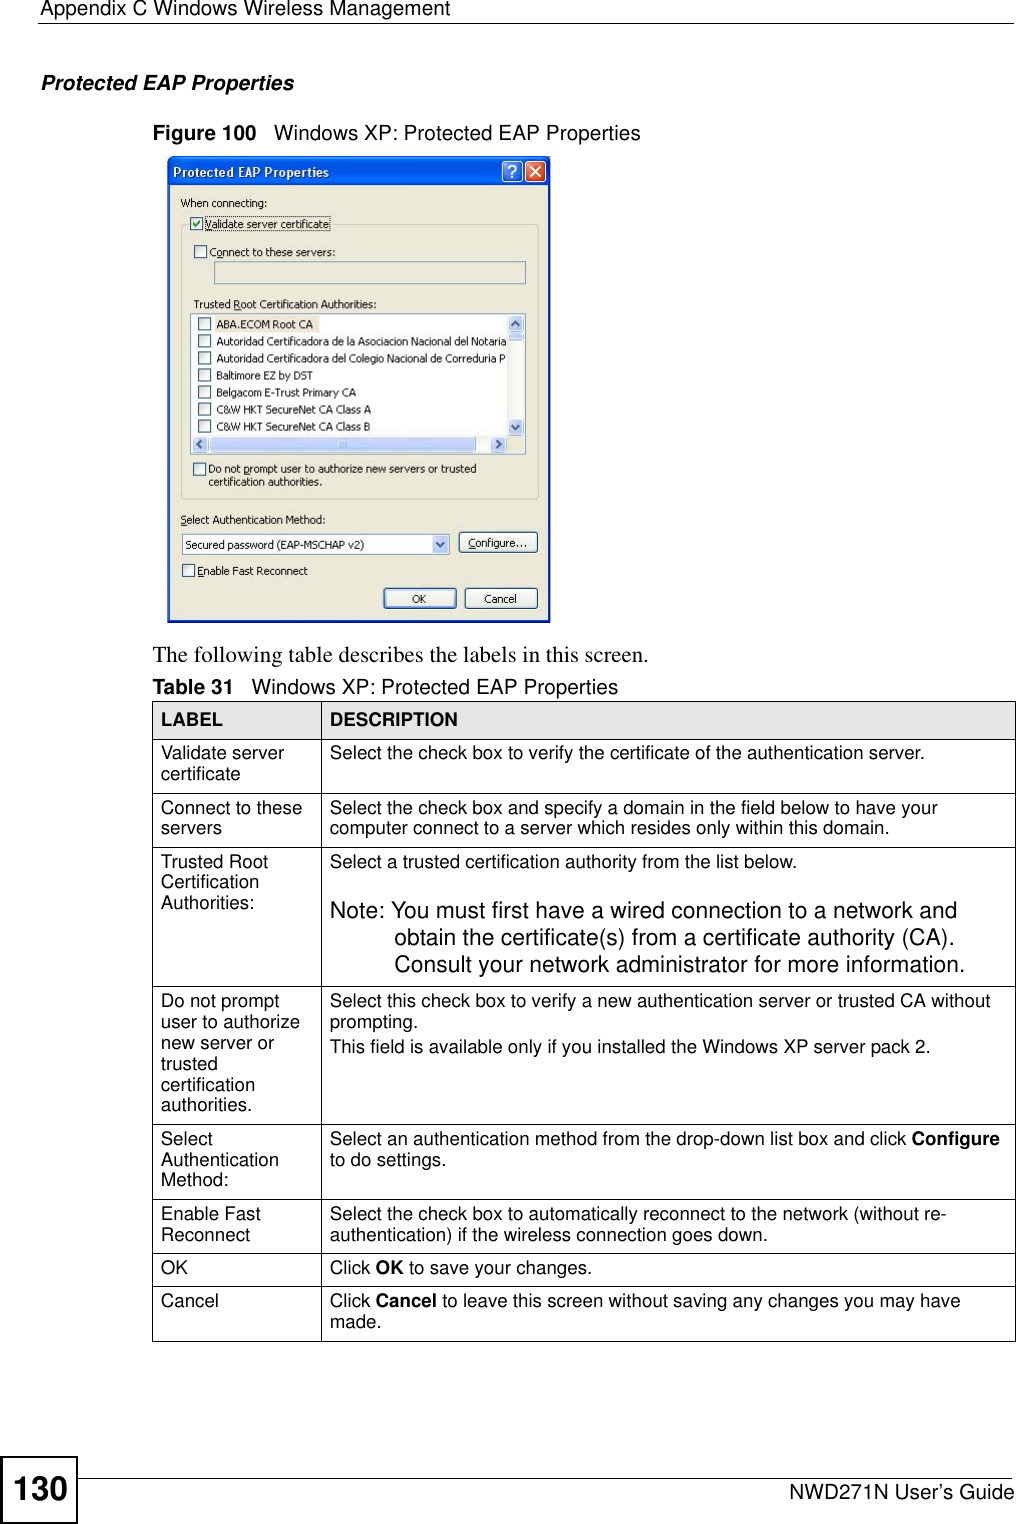 Appendix C Windows Wireless ManagementNWD271N User’s Guide130Protected EAP PropertiesFigure 100   Windows XP: Protected EAP PropertiesThe following table describes the labels in this screen.Table 31   Windows XP: Protected EAP PropertiesLABEL DESCRIPTIONValidate server certificate Select the check box to verify the certificate of the authentication server.Connect to these servers Select the check box and specify a domain in the field below to have your computer connect to a server which resides only within this domain.Trusted Root Certification Authorities:Select a trusted certification authority from the list below.Note: You must first have a wired connection to a network and obtain the certificate(s) from a certificate authority (CA). Consult your network administrator for more information.Do not prompt user to authorize new server or trusted certification authorities.Select this check box to verify a new authentication server or trusted CA without prompting.This field is available only if you installed the Windows XP server pack 2.Select Authentication Method: Select an authentication method from the drop-down list box and click Configure to do settings.Enable Fast Reconnect Select the check box to automatically reconnect to the network (without re-authentication) if the wireless connection goes down.OK Click OK to save your changes.Cancel Click Cancel to leave this screen without saving any changes you may have made.